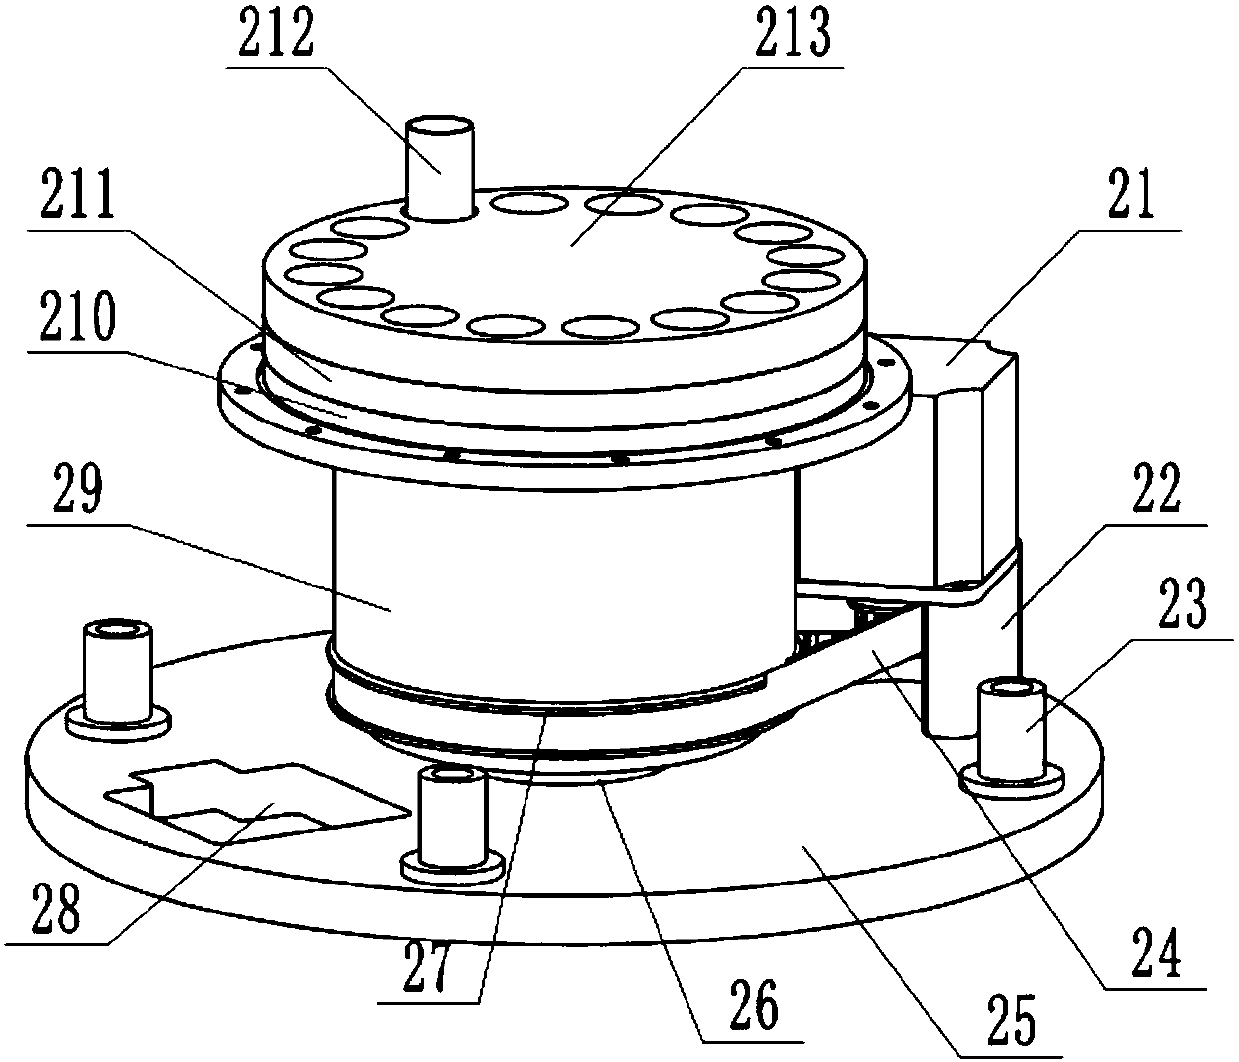 Combined medical test solution centrifugal device